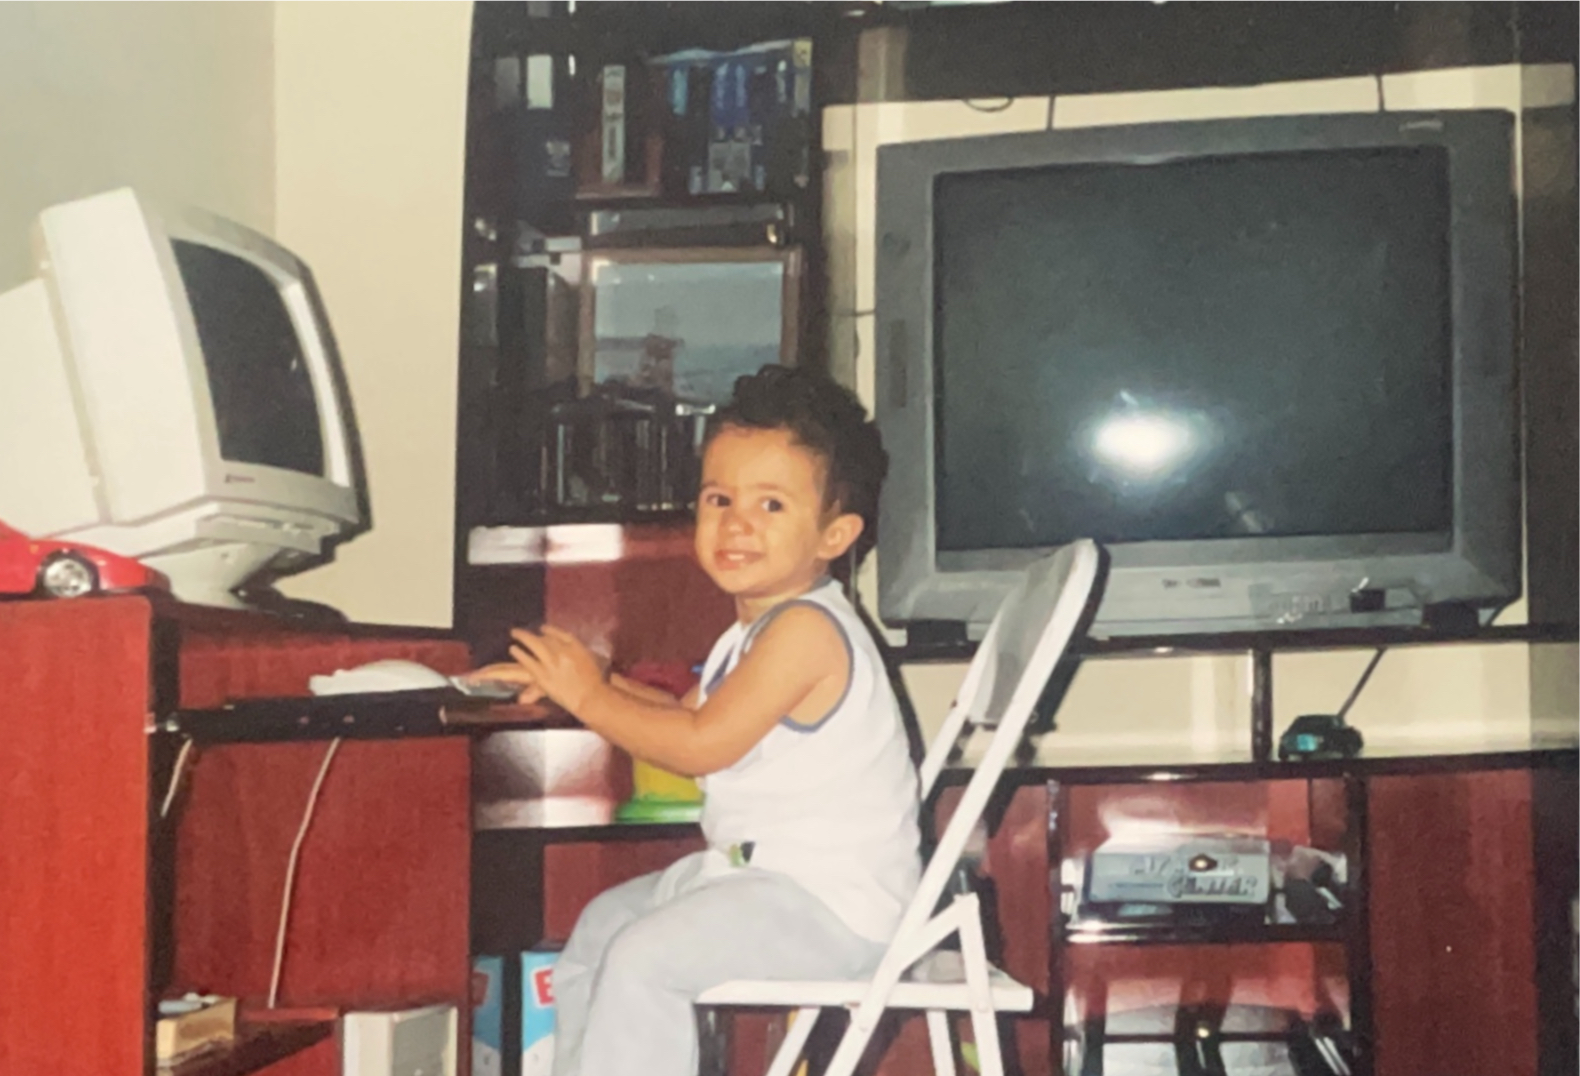 me as a baby sitting in front of a computer